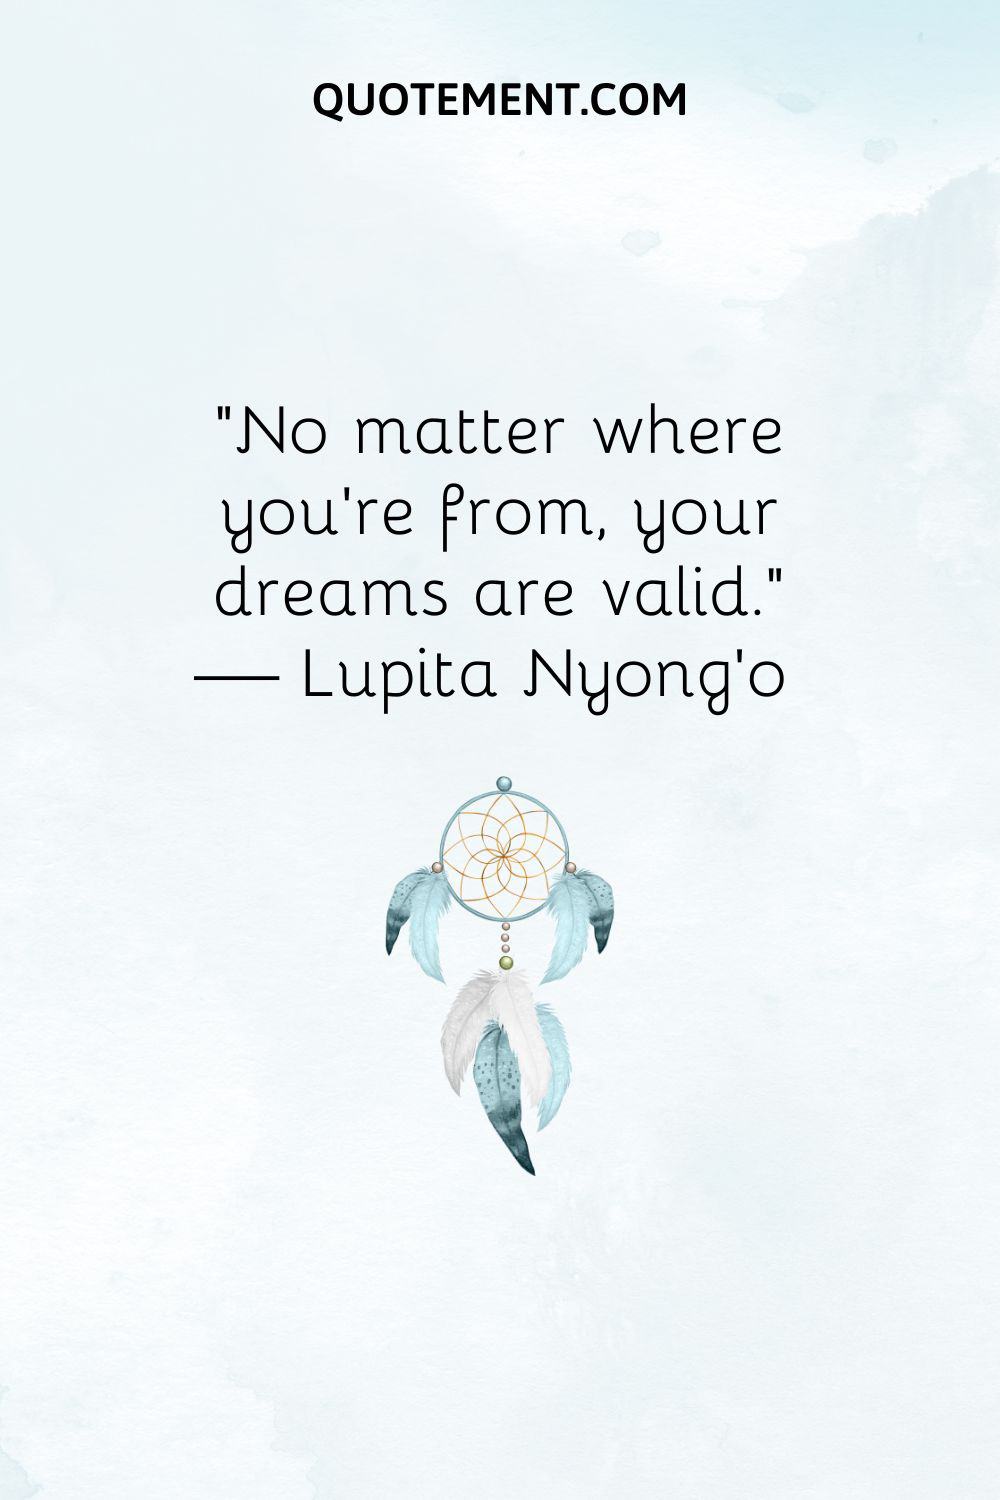 “No matter where you’re from, your dreams are valid.” — Lupita Nyong’o